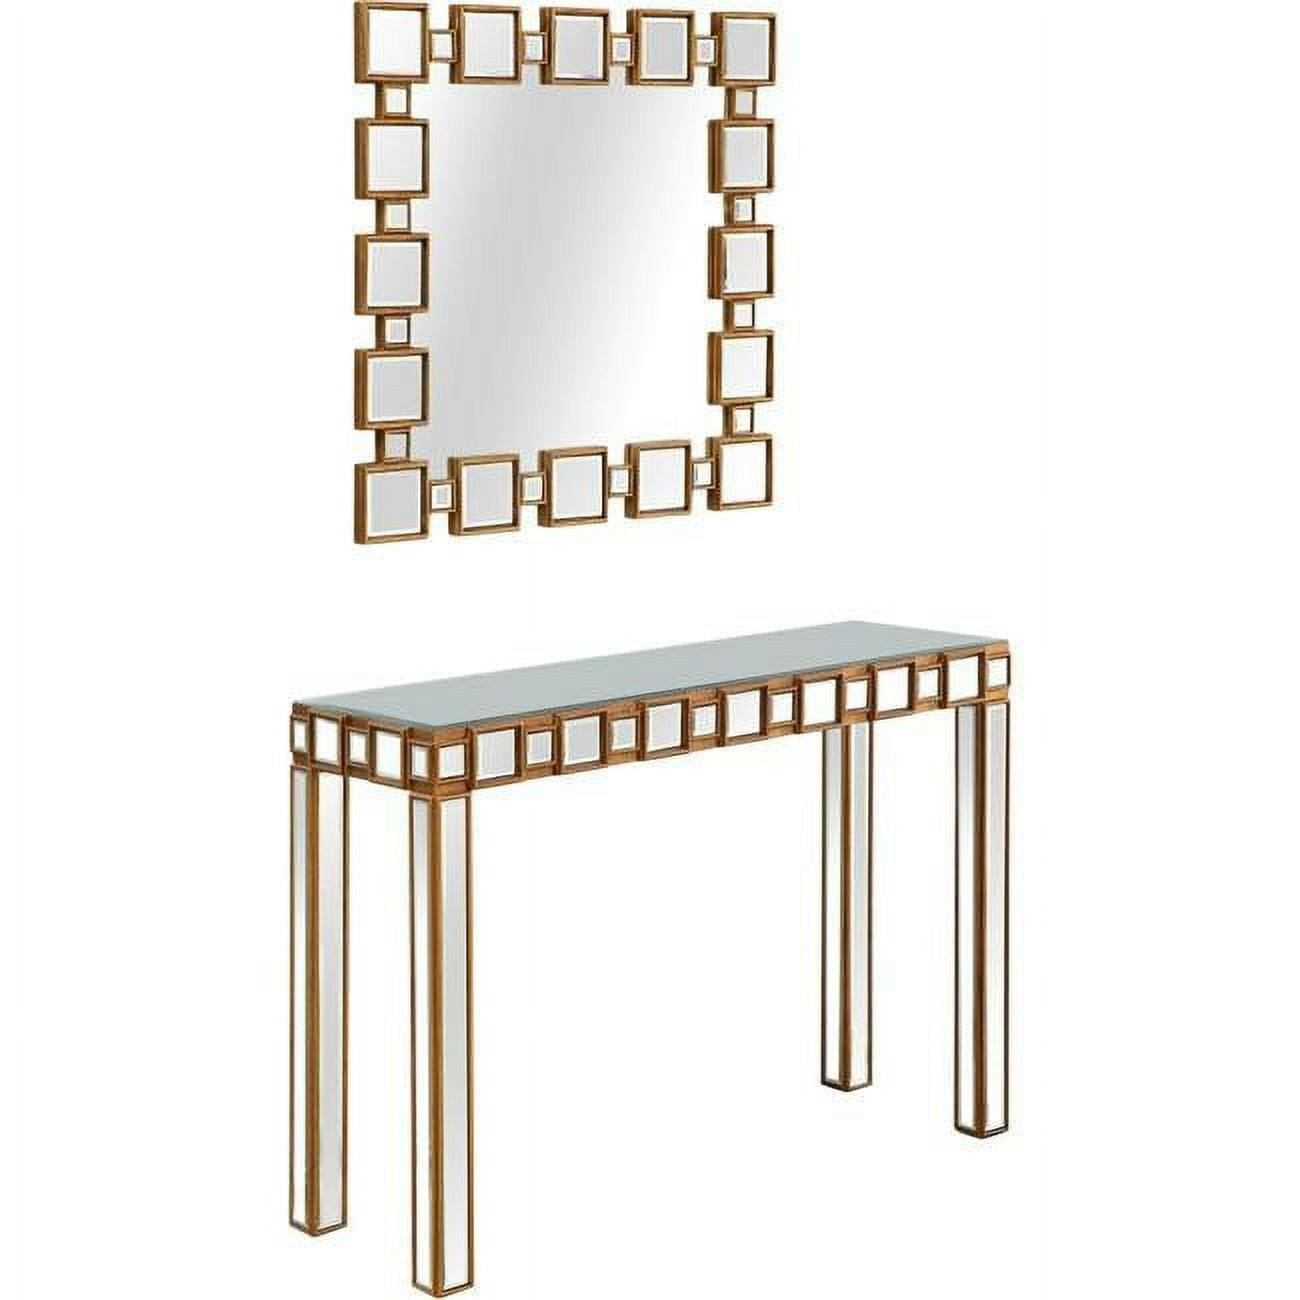 Contemporary Mirrored Wood Console Table with Storage